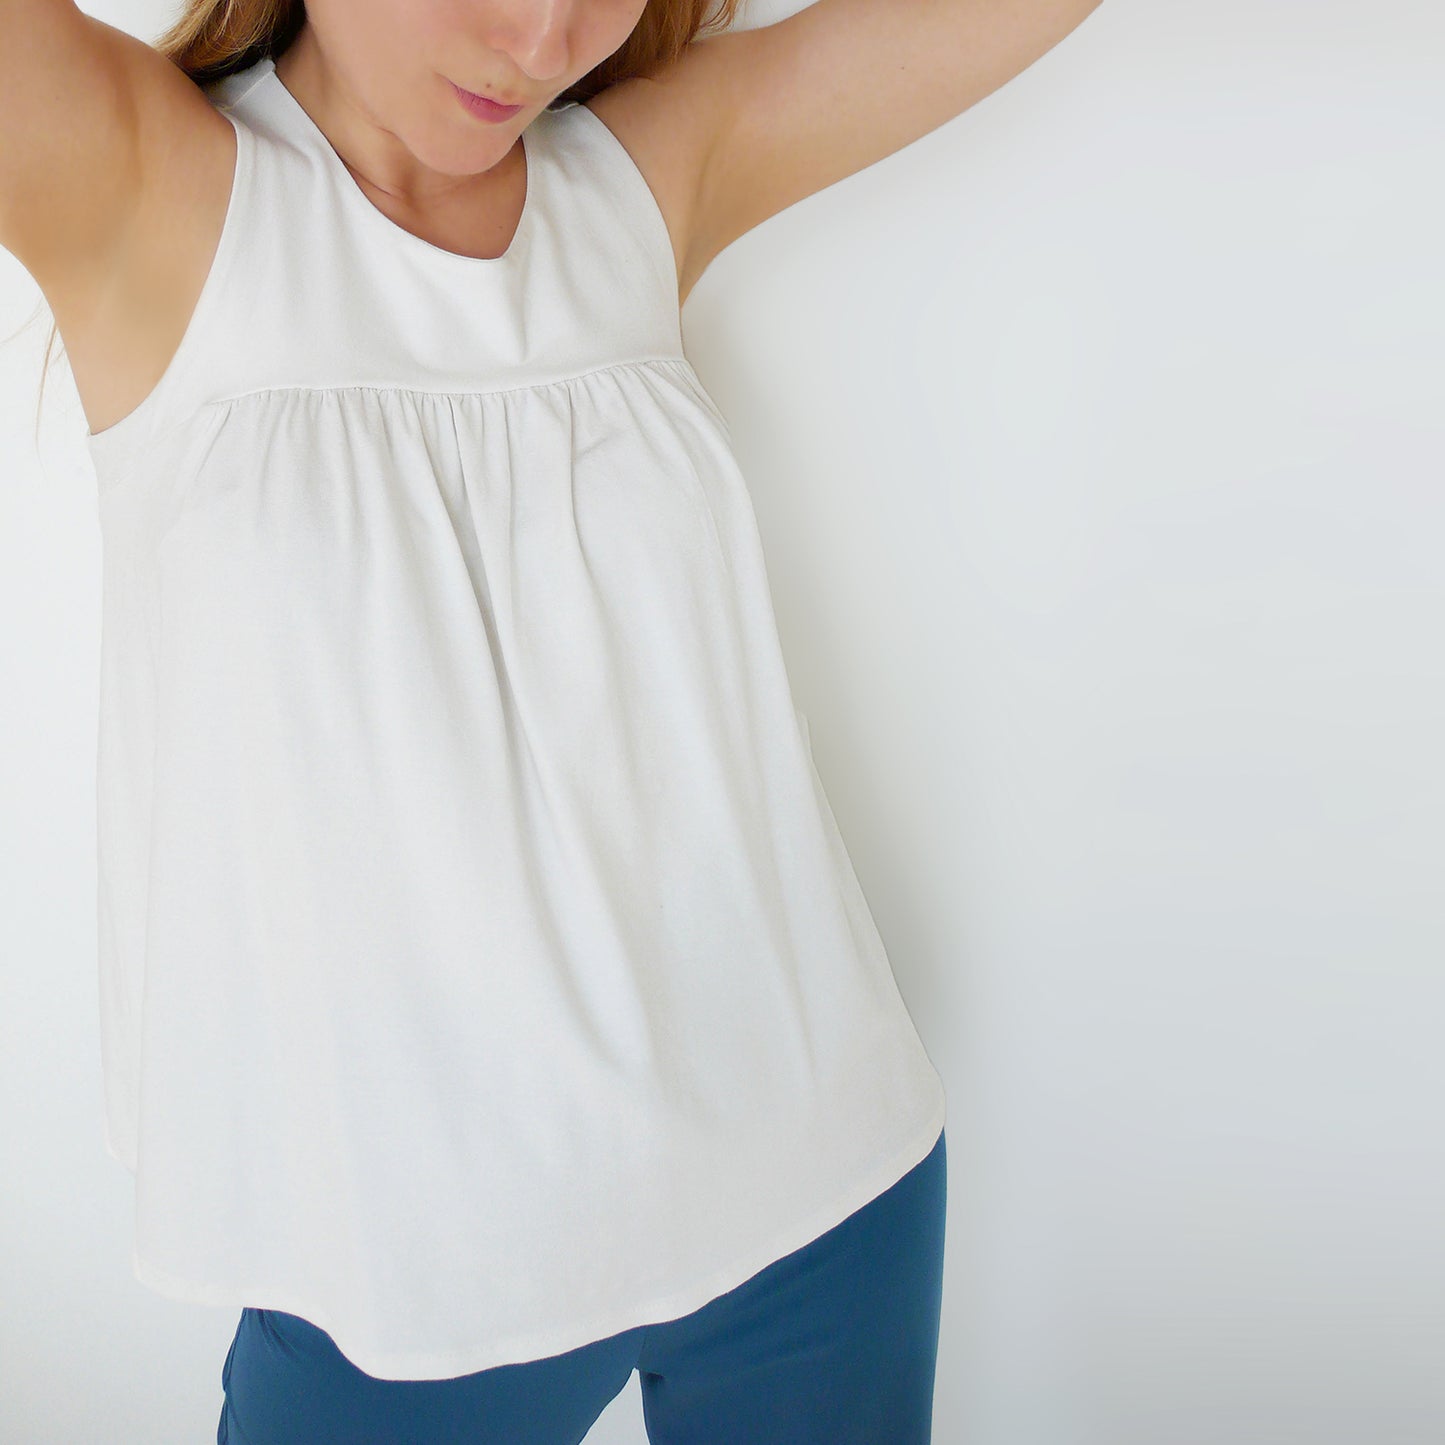 Sewing Pattern N.9 for Sleeveless Tank Top, XS-5XL